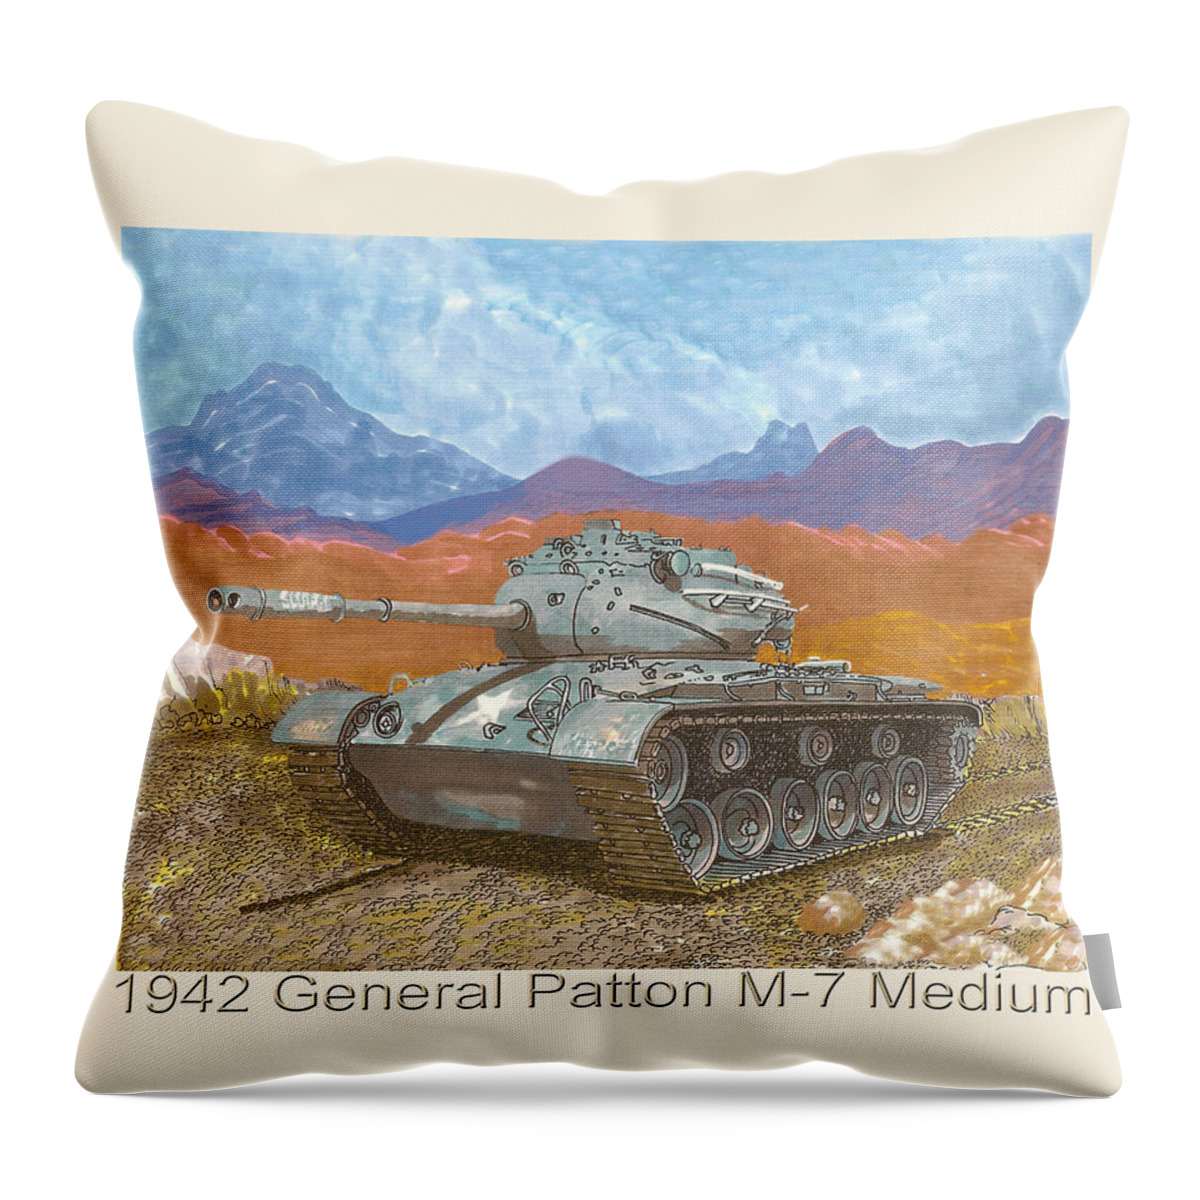 A Jack Pumphrey Painting Of A Patton M-47 Built By American Locomotive C. Throw Pillow featuring the painting 1942 General Patton M 47 Medium Tank by Jack Pumphrey